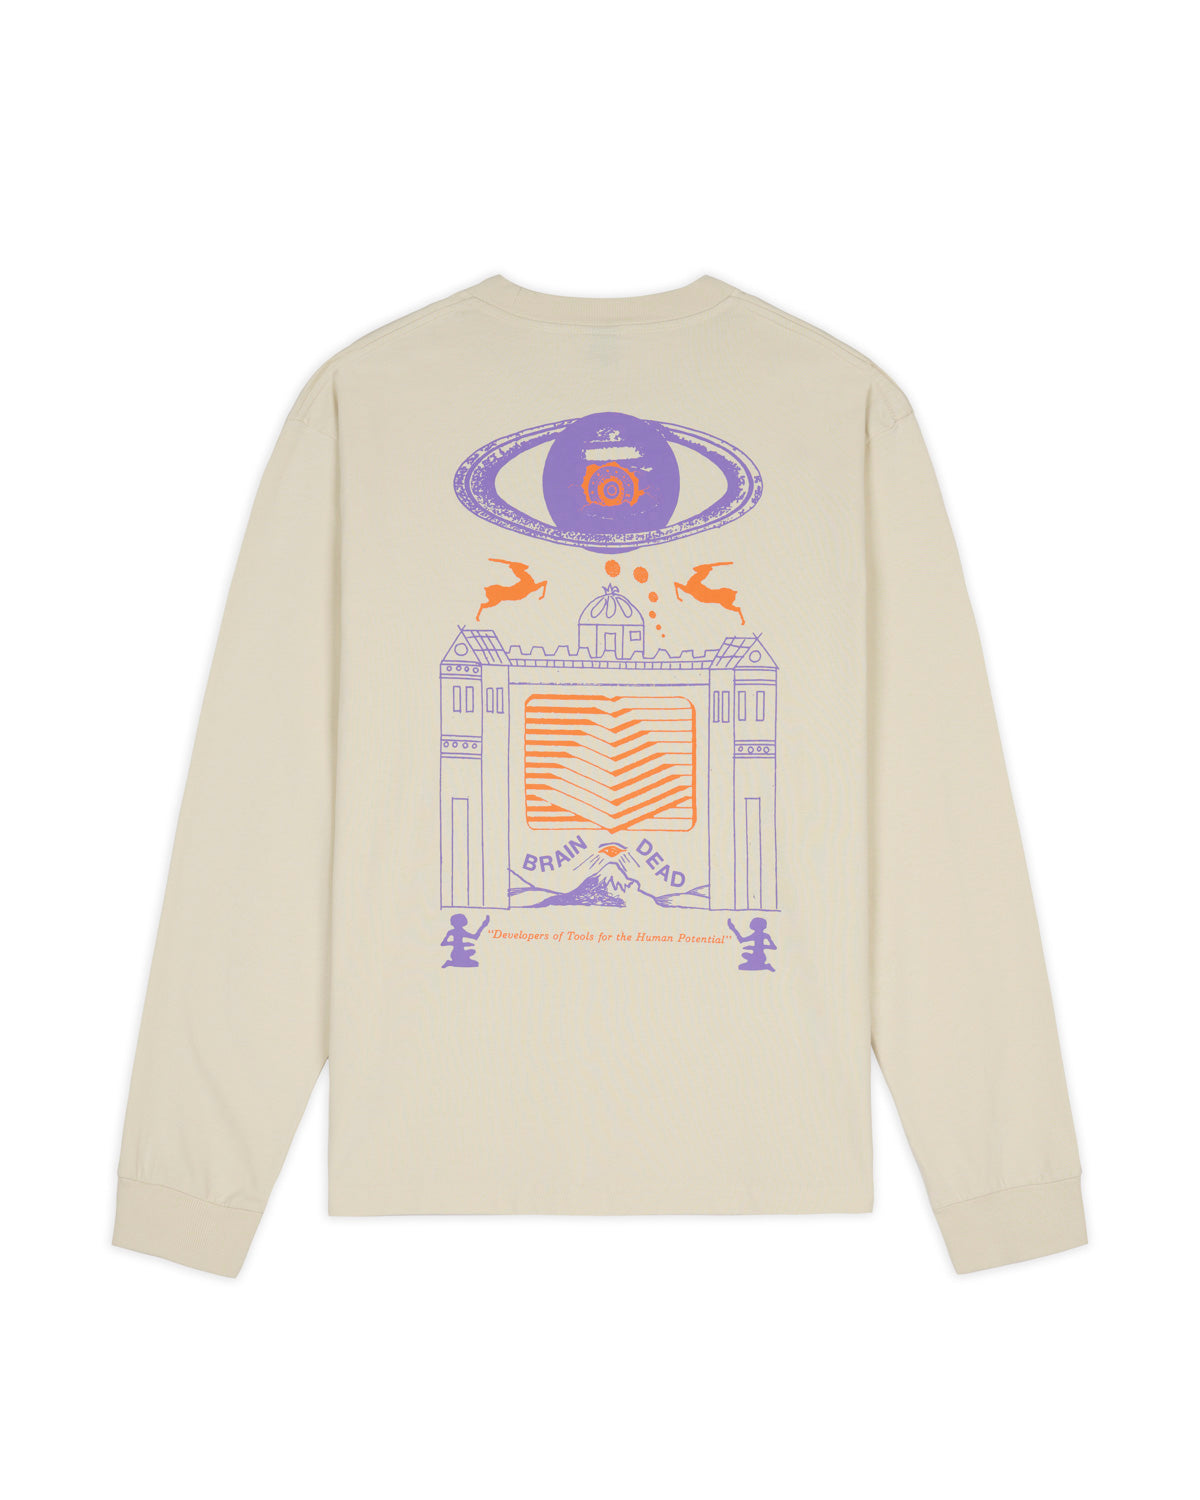 New Dimensions Long Sleeve - Grey 2